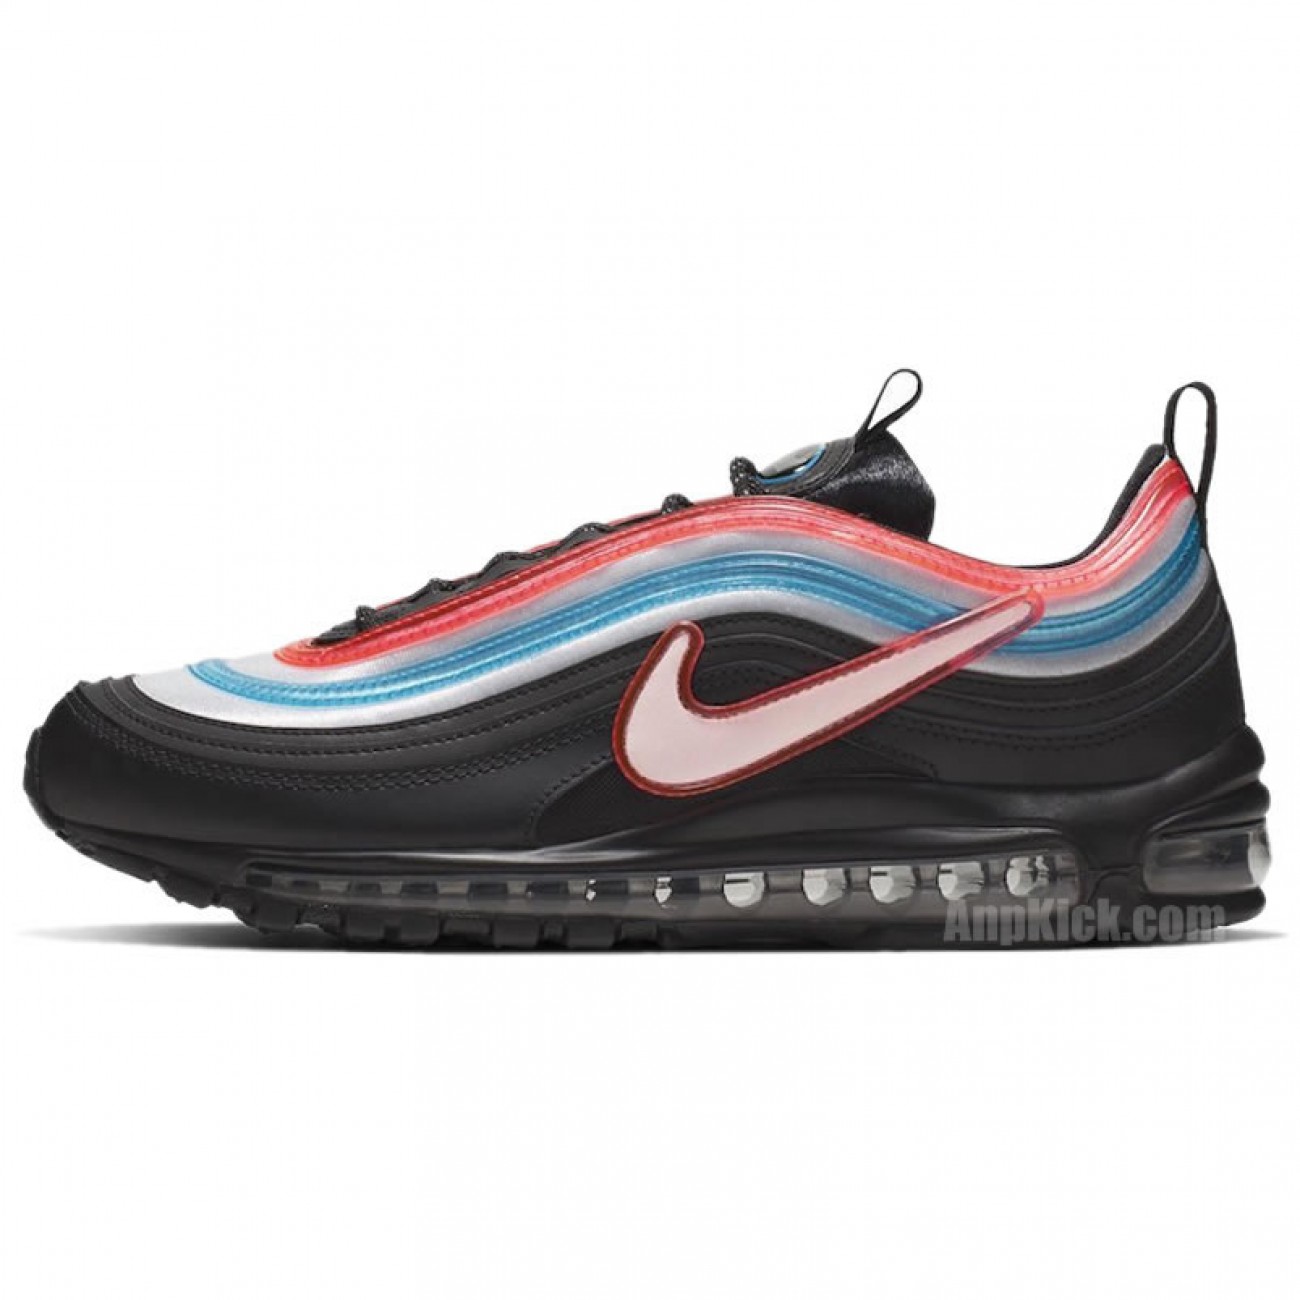 Nike Air Max 97 "Neon Seoul" On Feet Outfit Price For Sale I1503-001